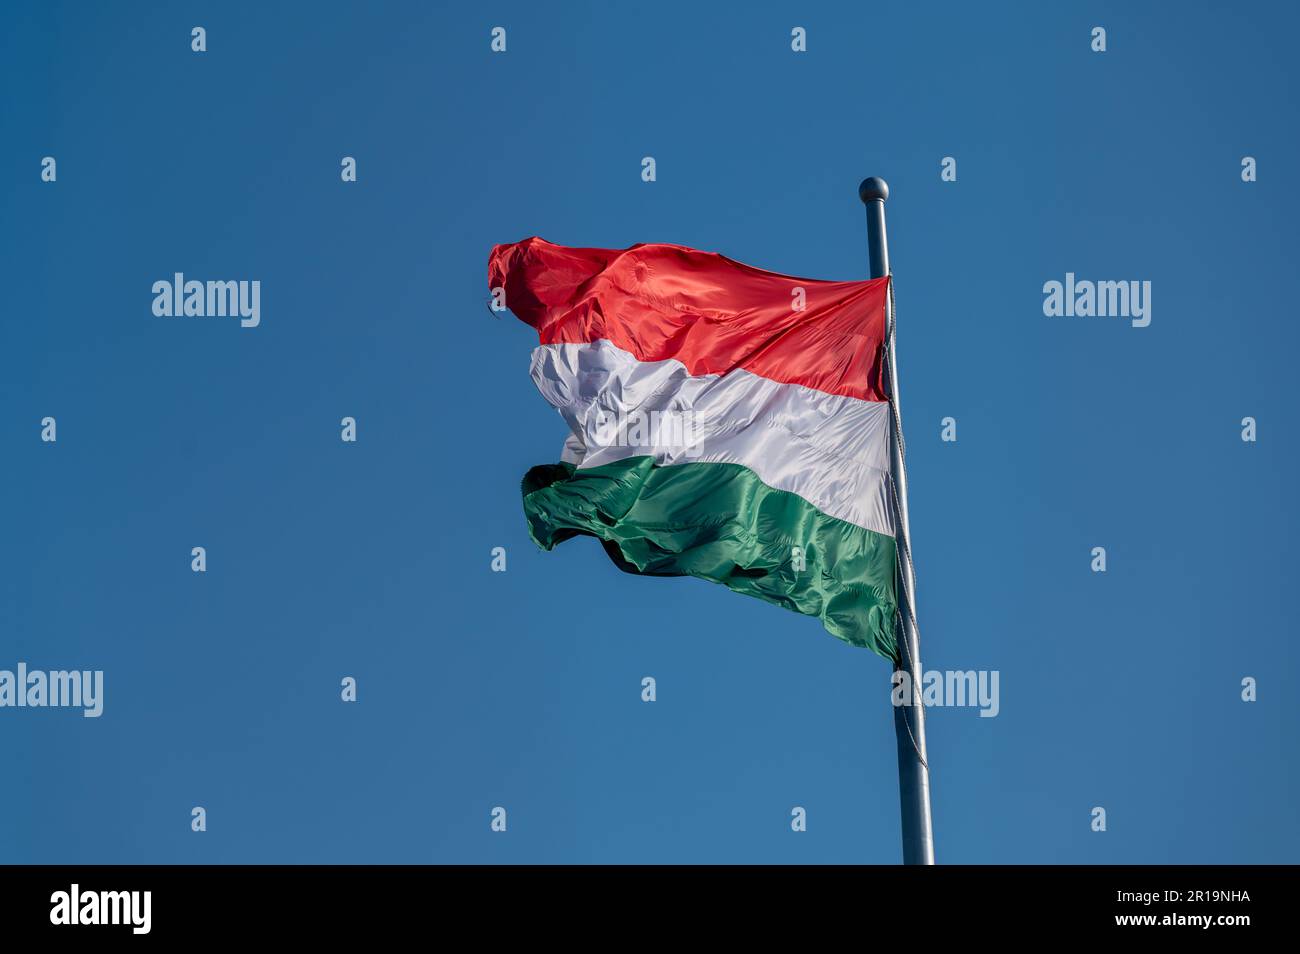 National flag of Hungary flying from a flagpole against a blue sky Stock Photo